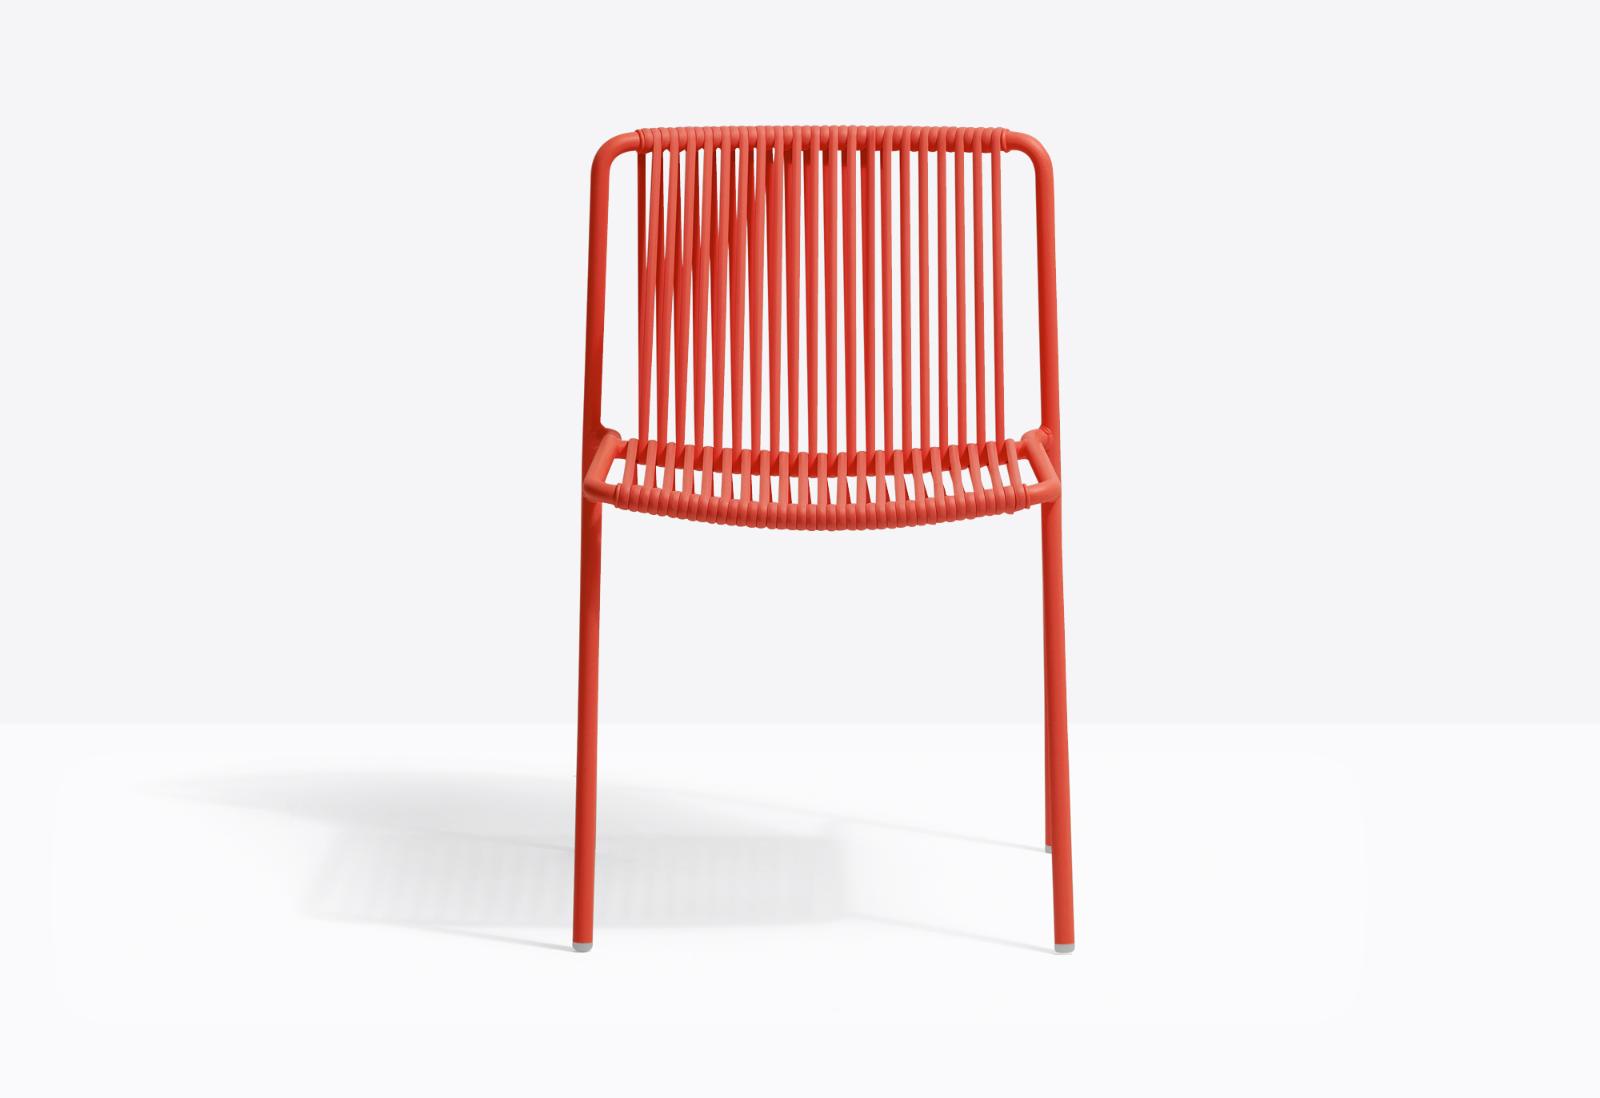 Extruded Chair (White), Important Design, 2021